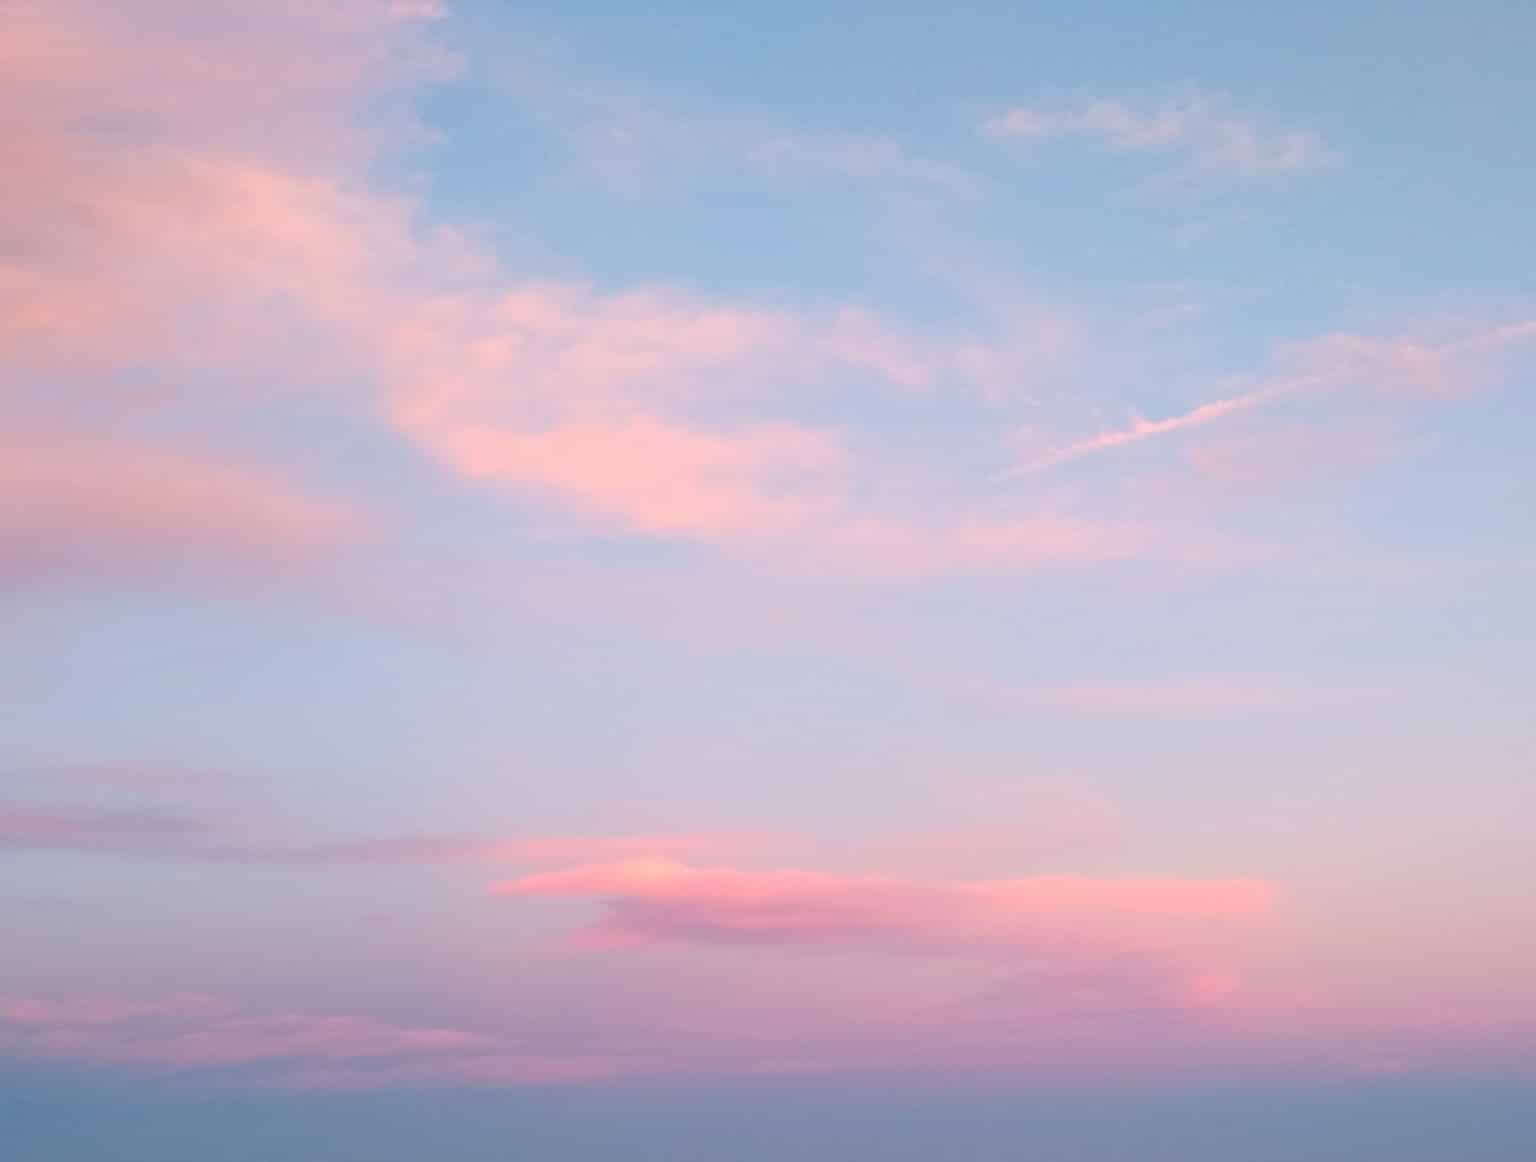 sky with pink clouds